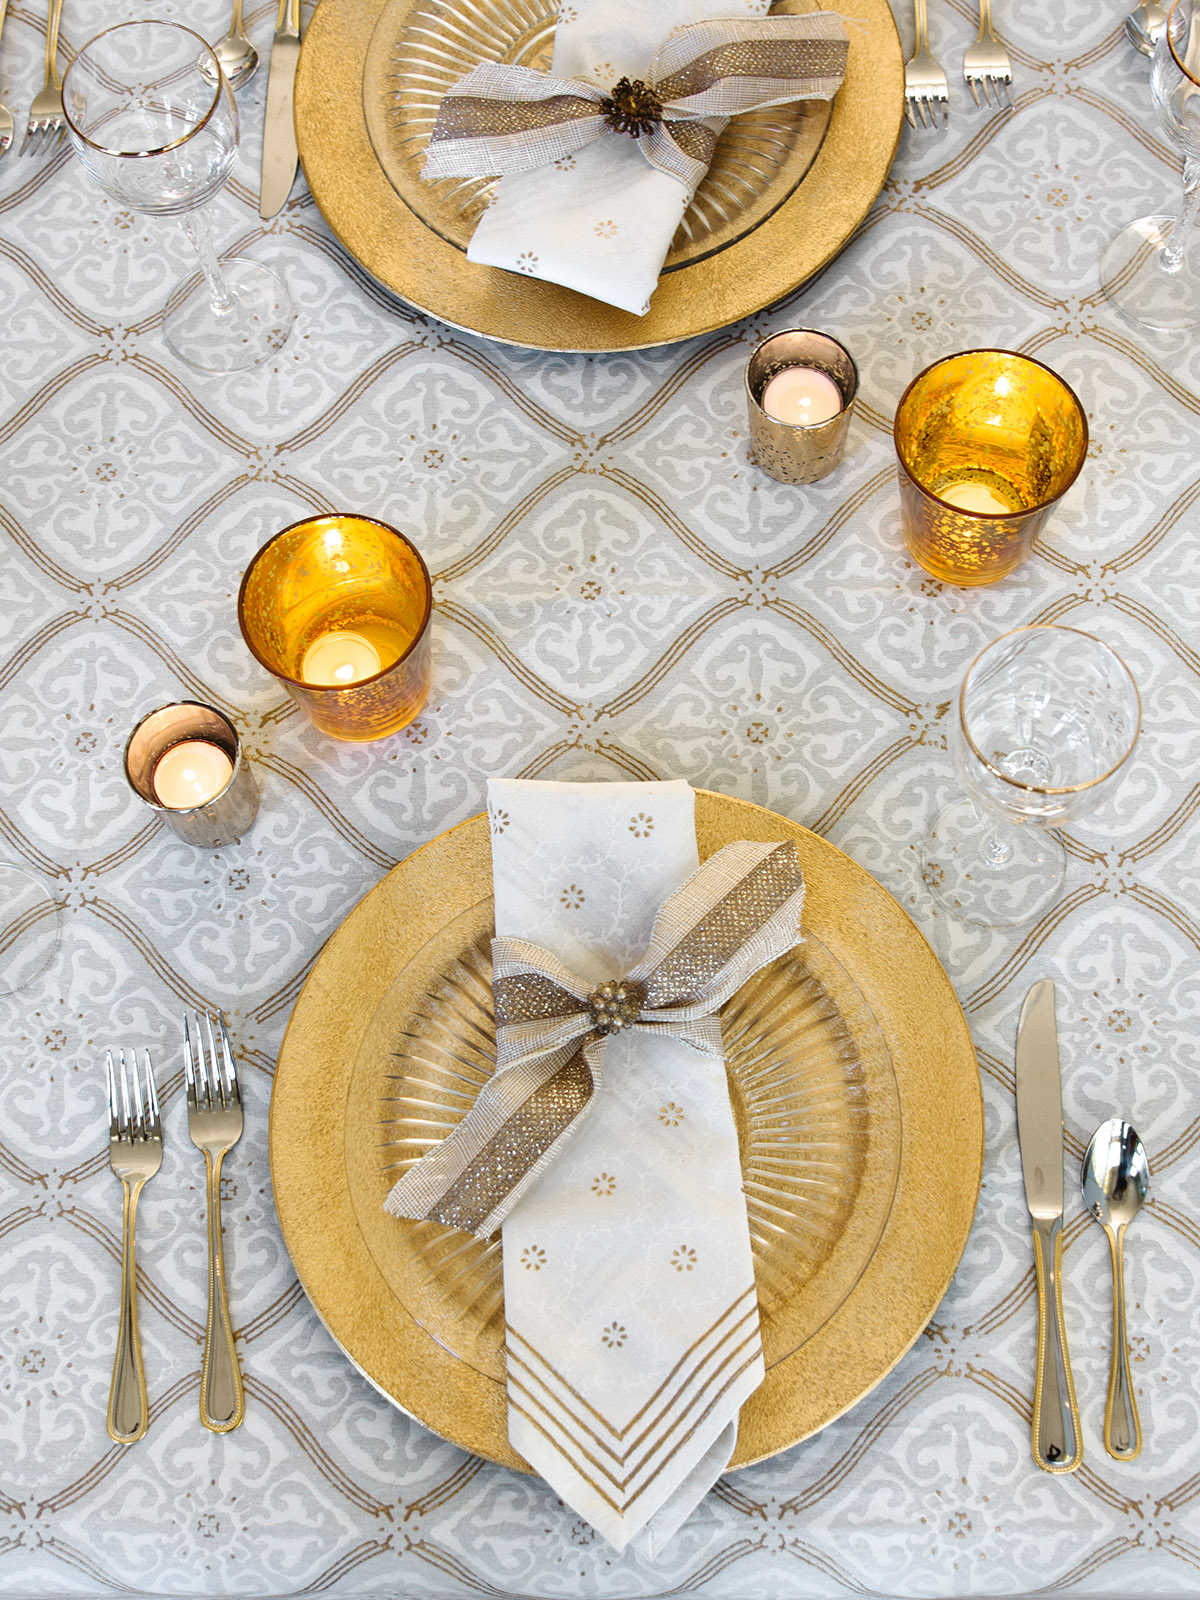 white and gold table linens for a winter wonderland theme